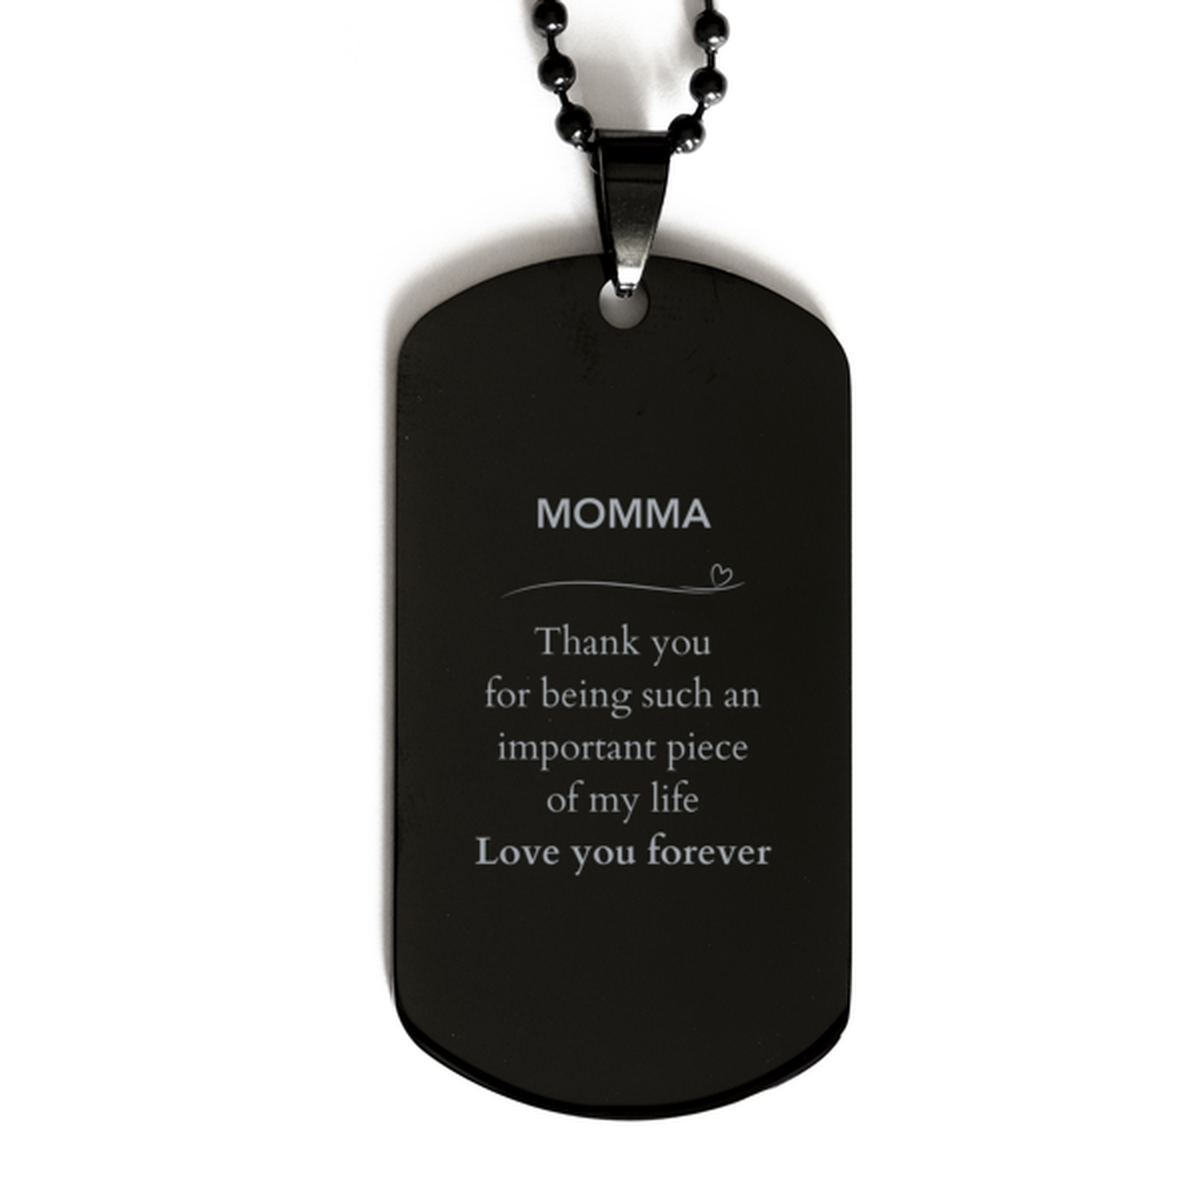 Appropriate Momma Black Dog Tag Epic Birthday Gifts for Momma Thank you for being such an important piece of my life Momma Christmas Mothers Fathers Day